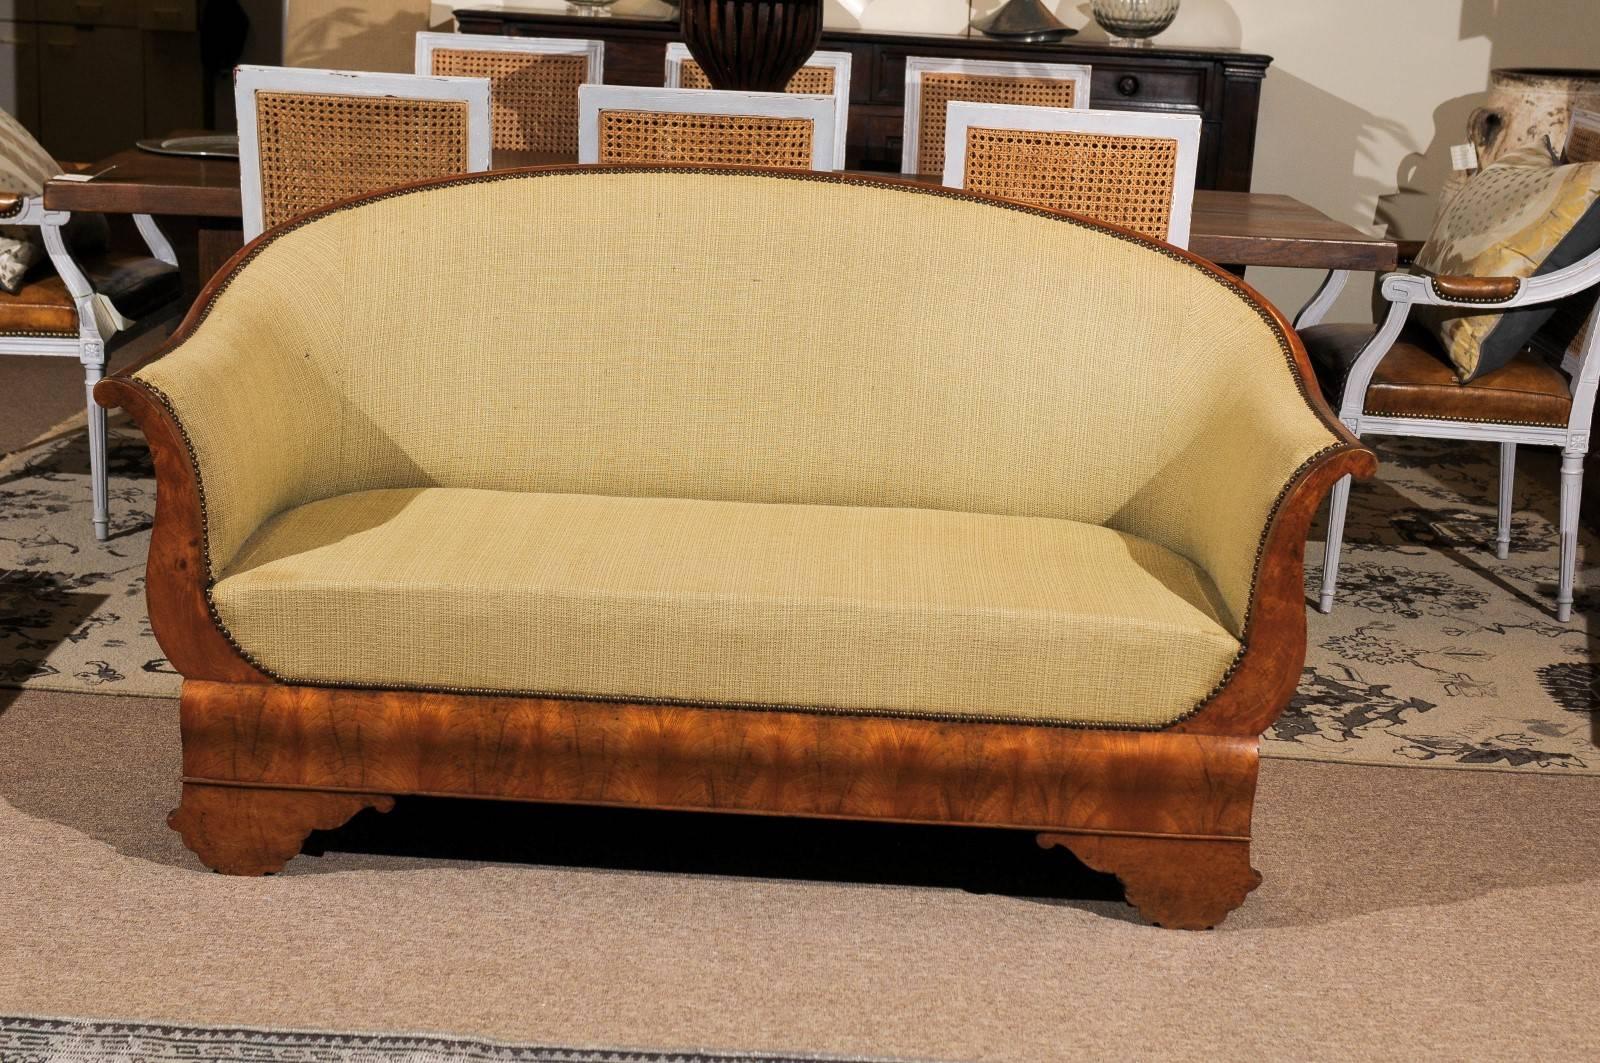 Period Louis Philippe Settee in Burled Walnut, circa 1840
A very unusual find, this period Louis Philippe settee has a lot of style. The burled walnut veneer across the front and the sides has an exquisite pattern and patina. It would be beautiful